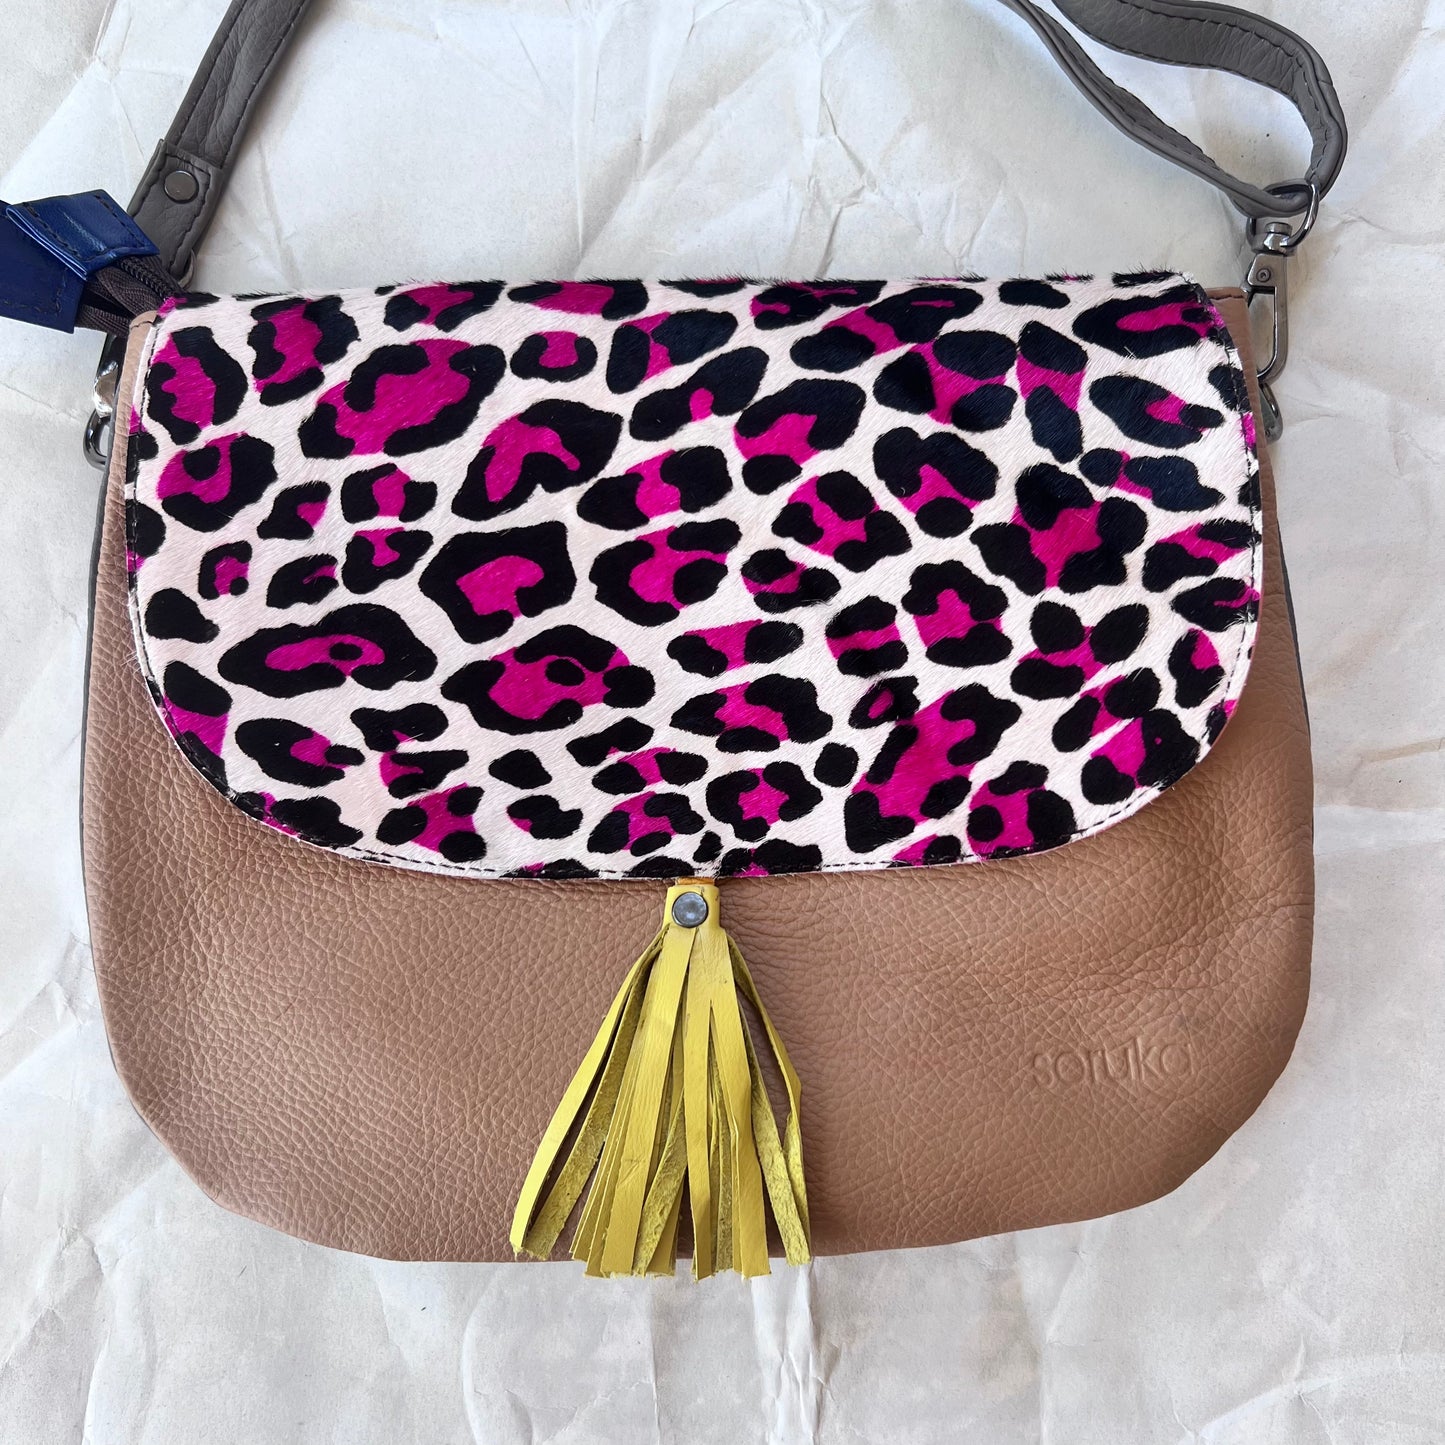 rounded brown purse with black and pink cheetah print flap, yellow tassel, and grey strap.